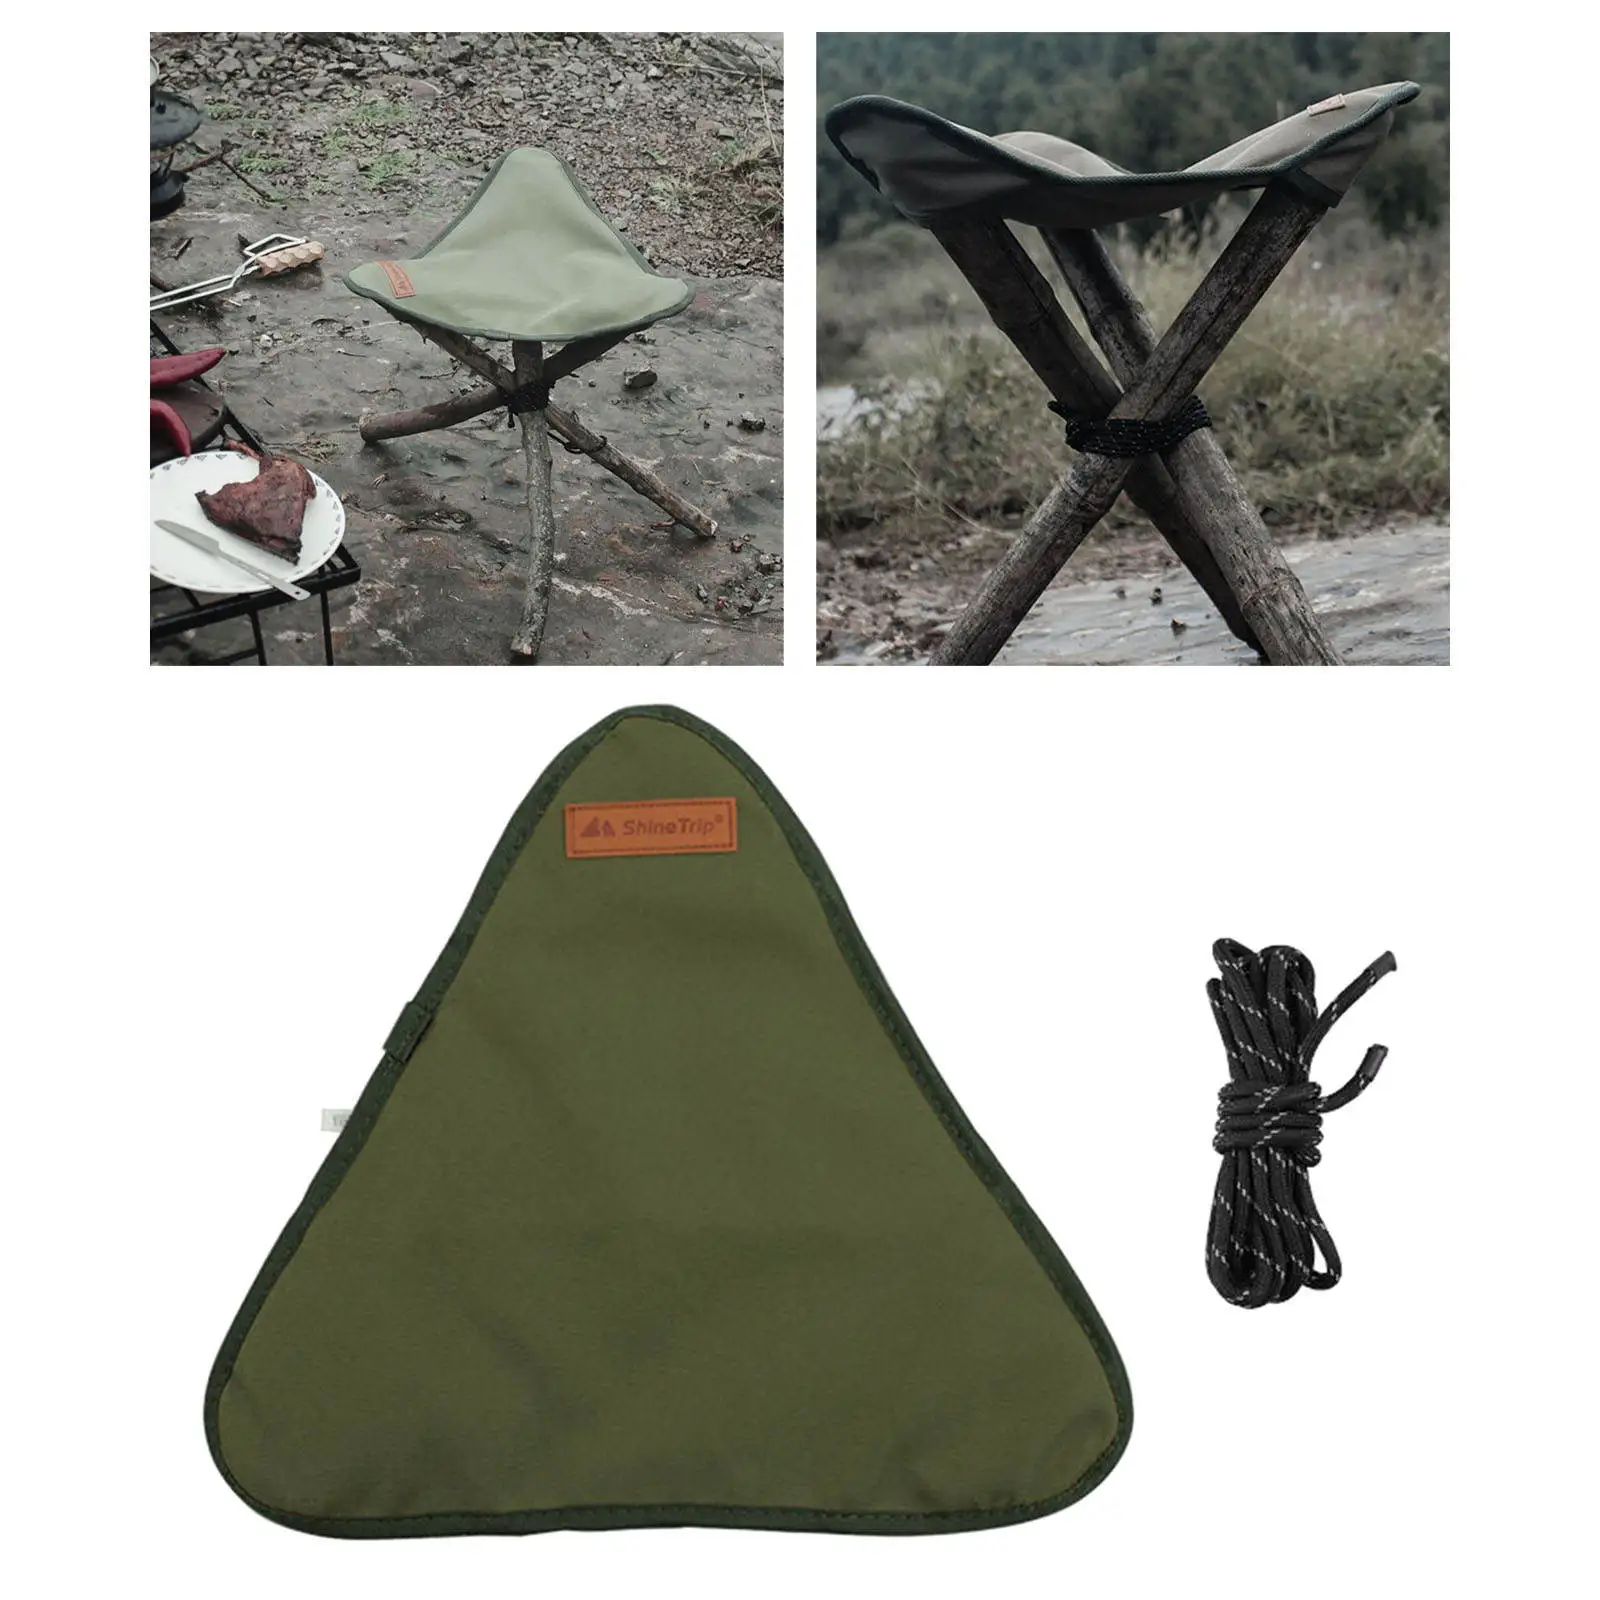 Foldable Tripod Stool Cloth Waterproof Oxford Cloth 3 Legs Chair Seat Cover for Camping, Outdoor, Fishing, Hiking Accessories